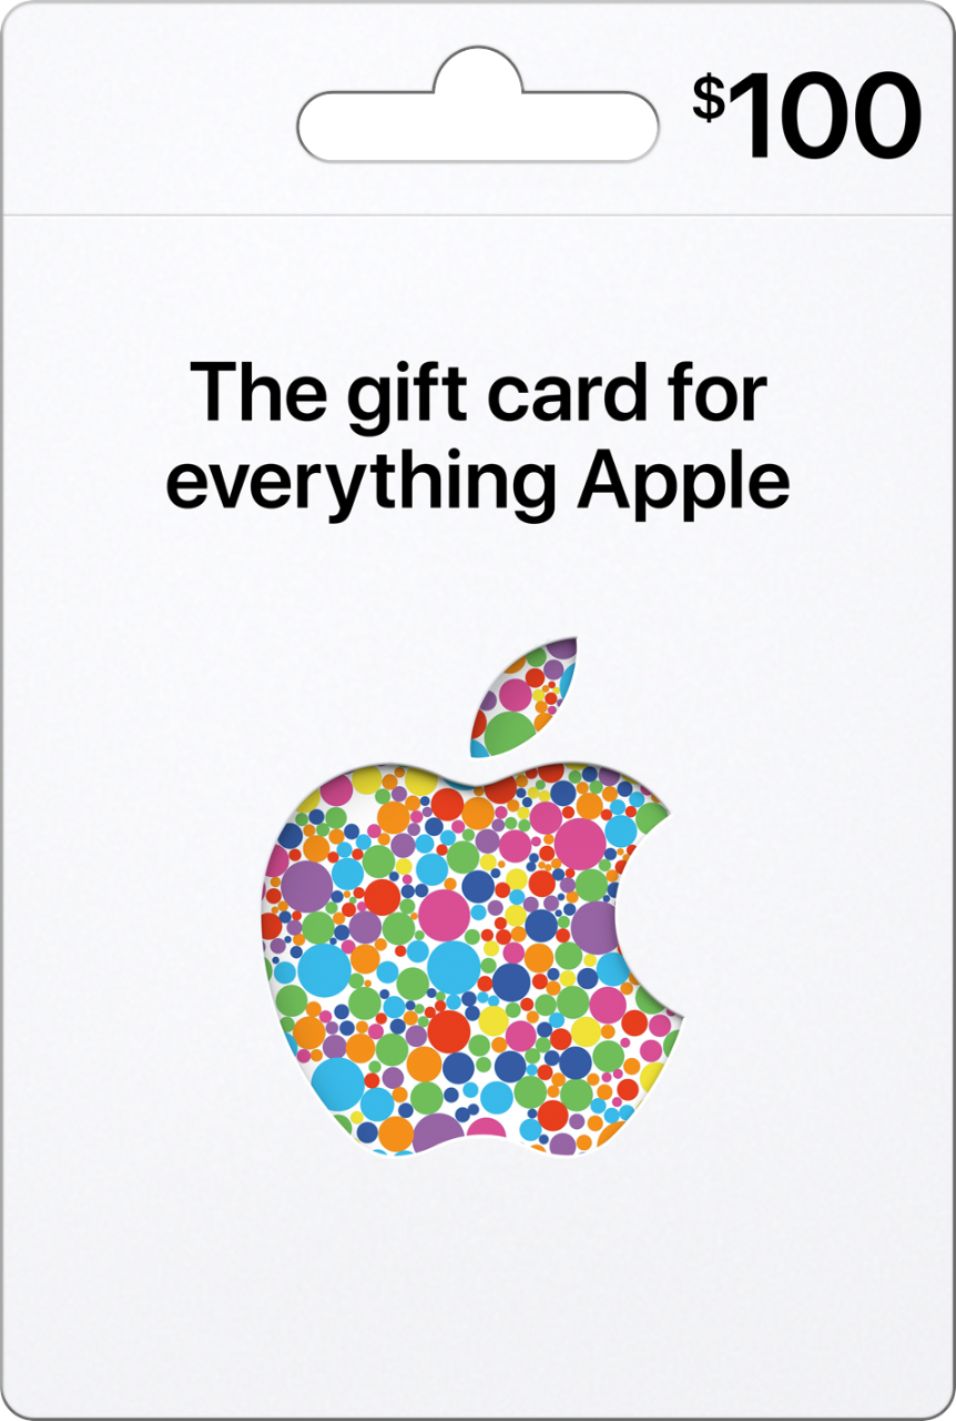 ITUNES GIFT CARD $100